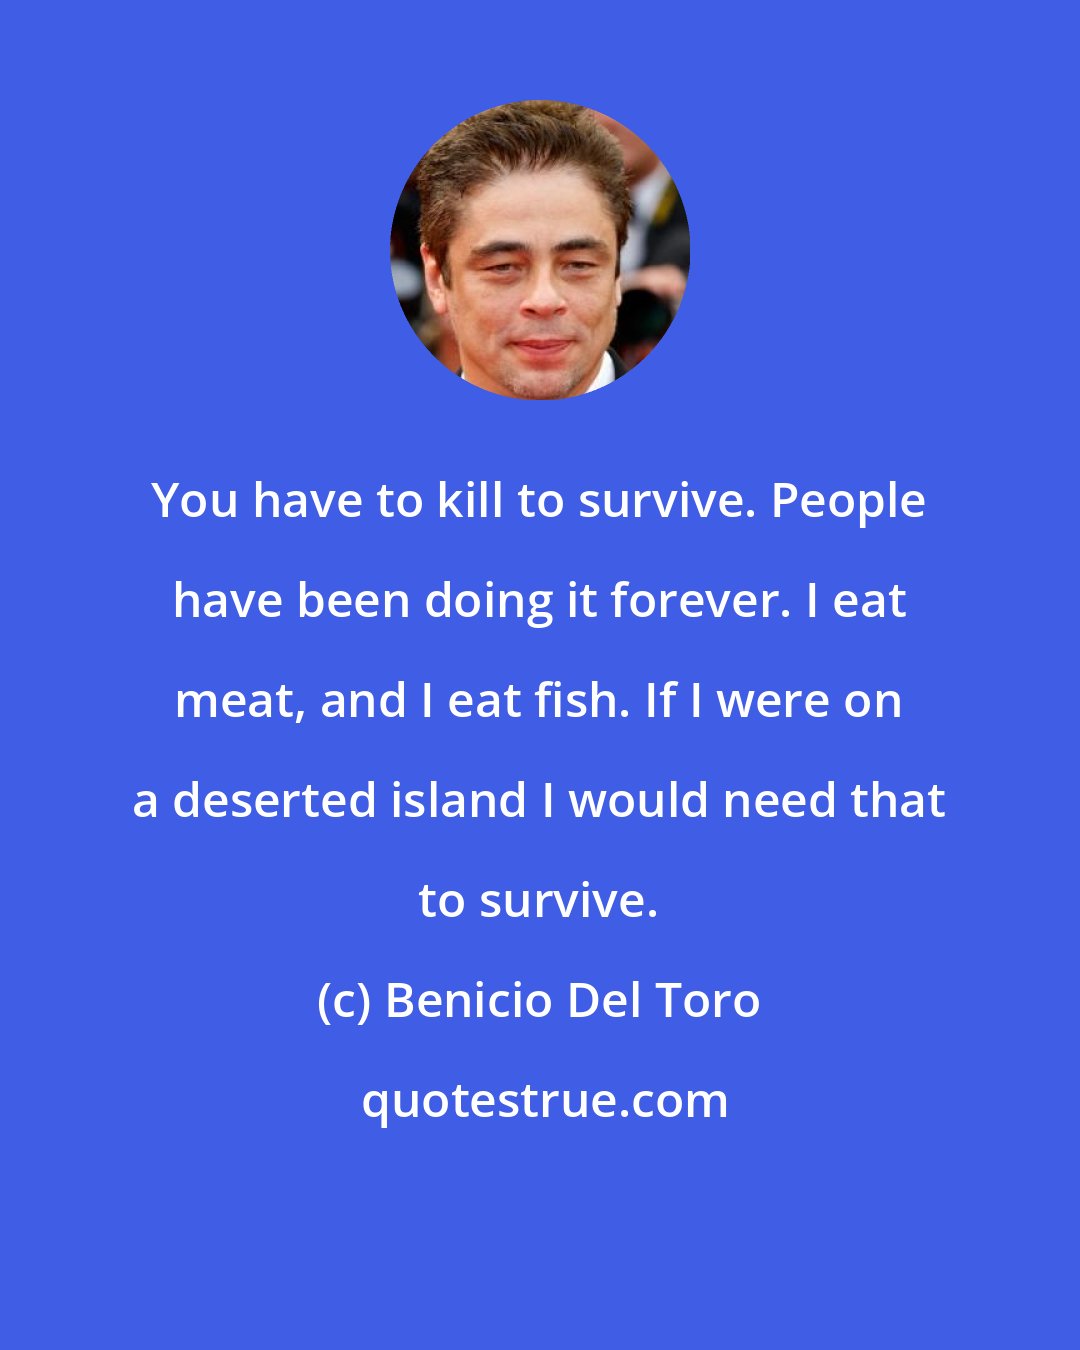 Benicio Del Toro: You have to kill to survive. People have been doing it forever. I eat meat, and I eat fish. If I were on a deserted island I would need that to survive.